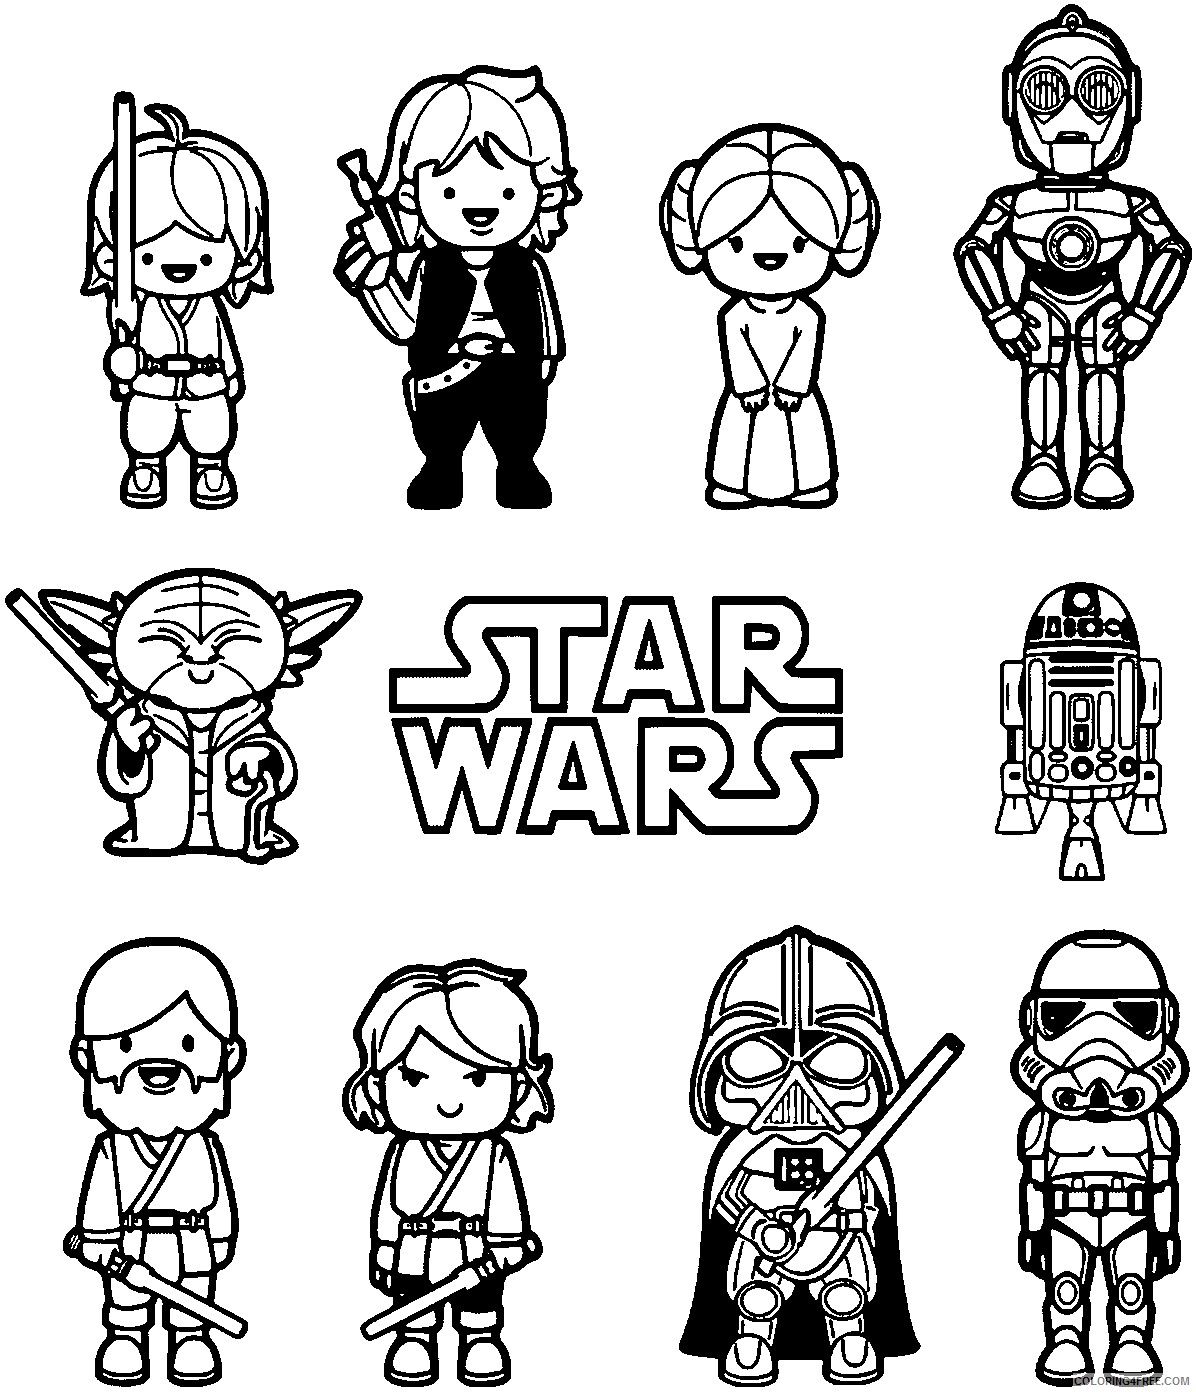 Star Wars Coloring Pages TV Film Star Wars Chibi Characters Printable 2020 07957 Coloring4free